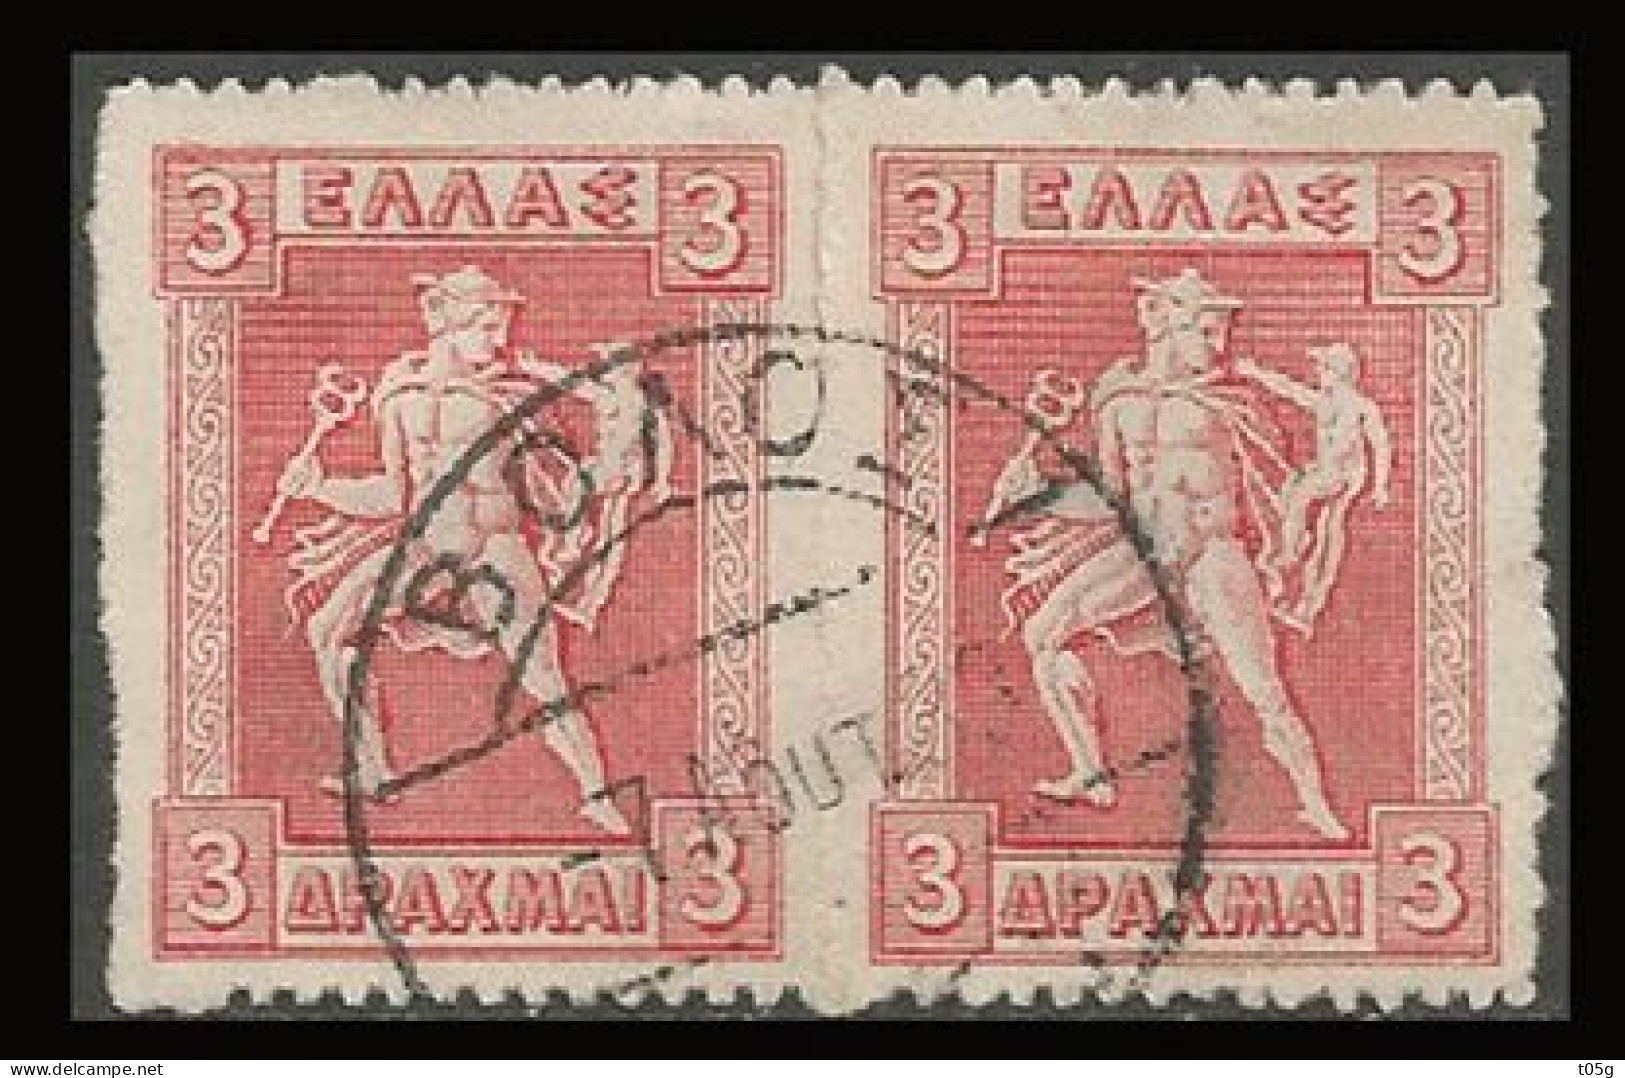 GREECE-GRECE- HELLAS 1913: Canc. (ΒΟΛΟΣ 7 ΑΥΓ 23) On 3drx Lithographic  used - Used Stamps